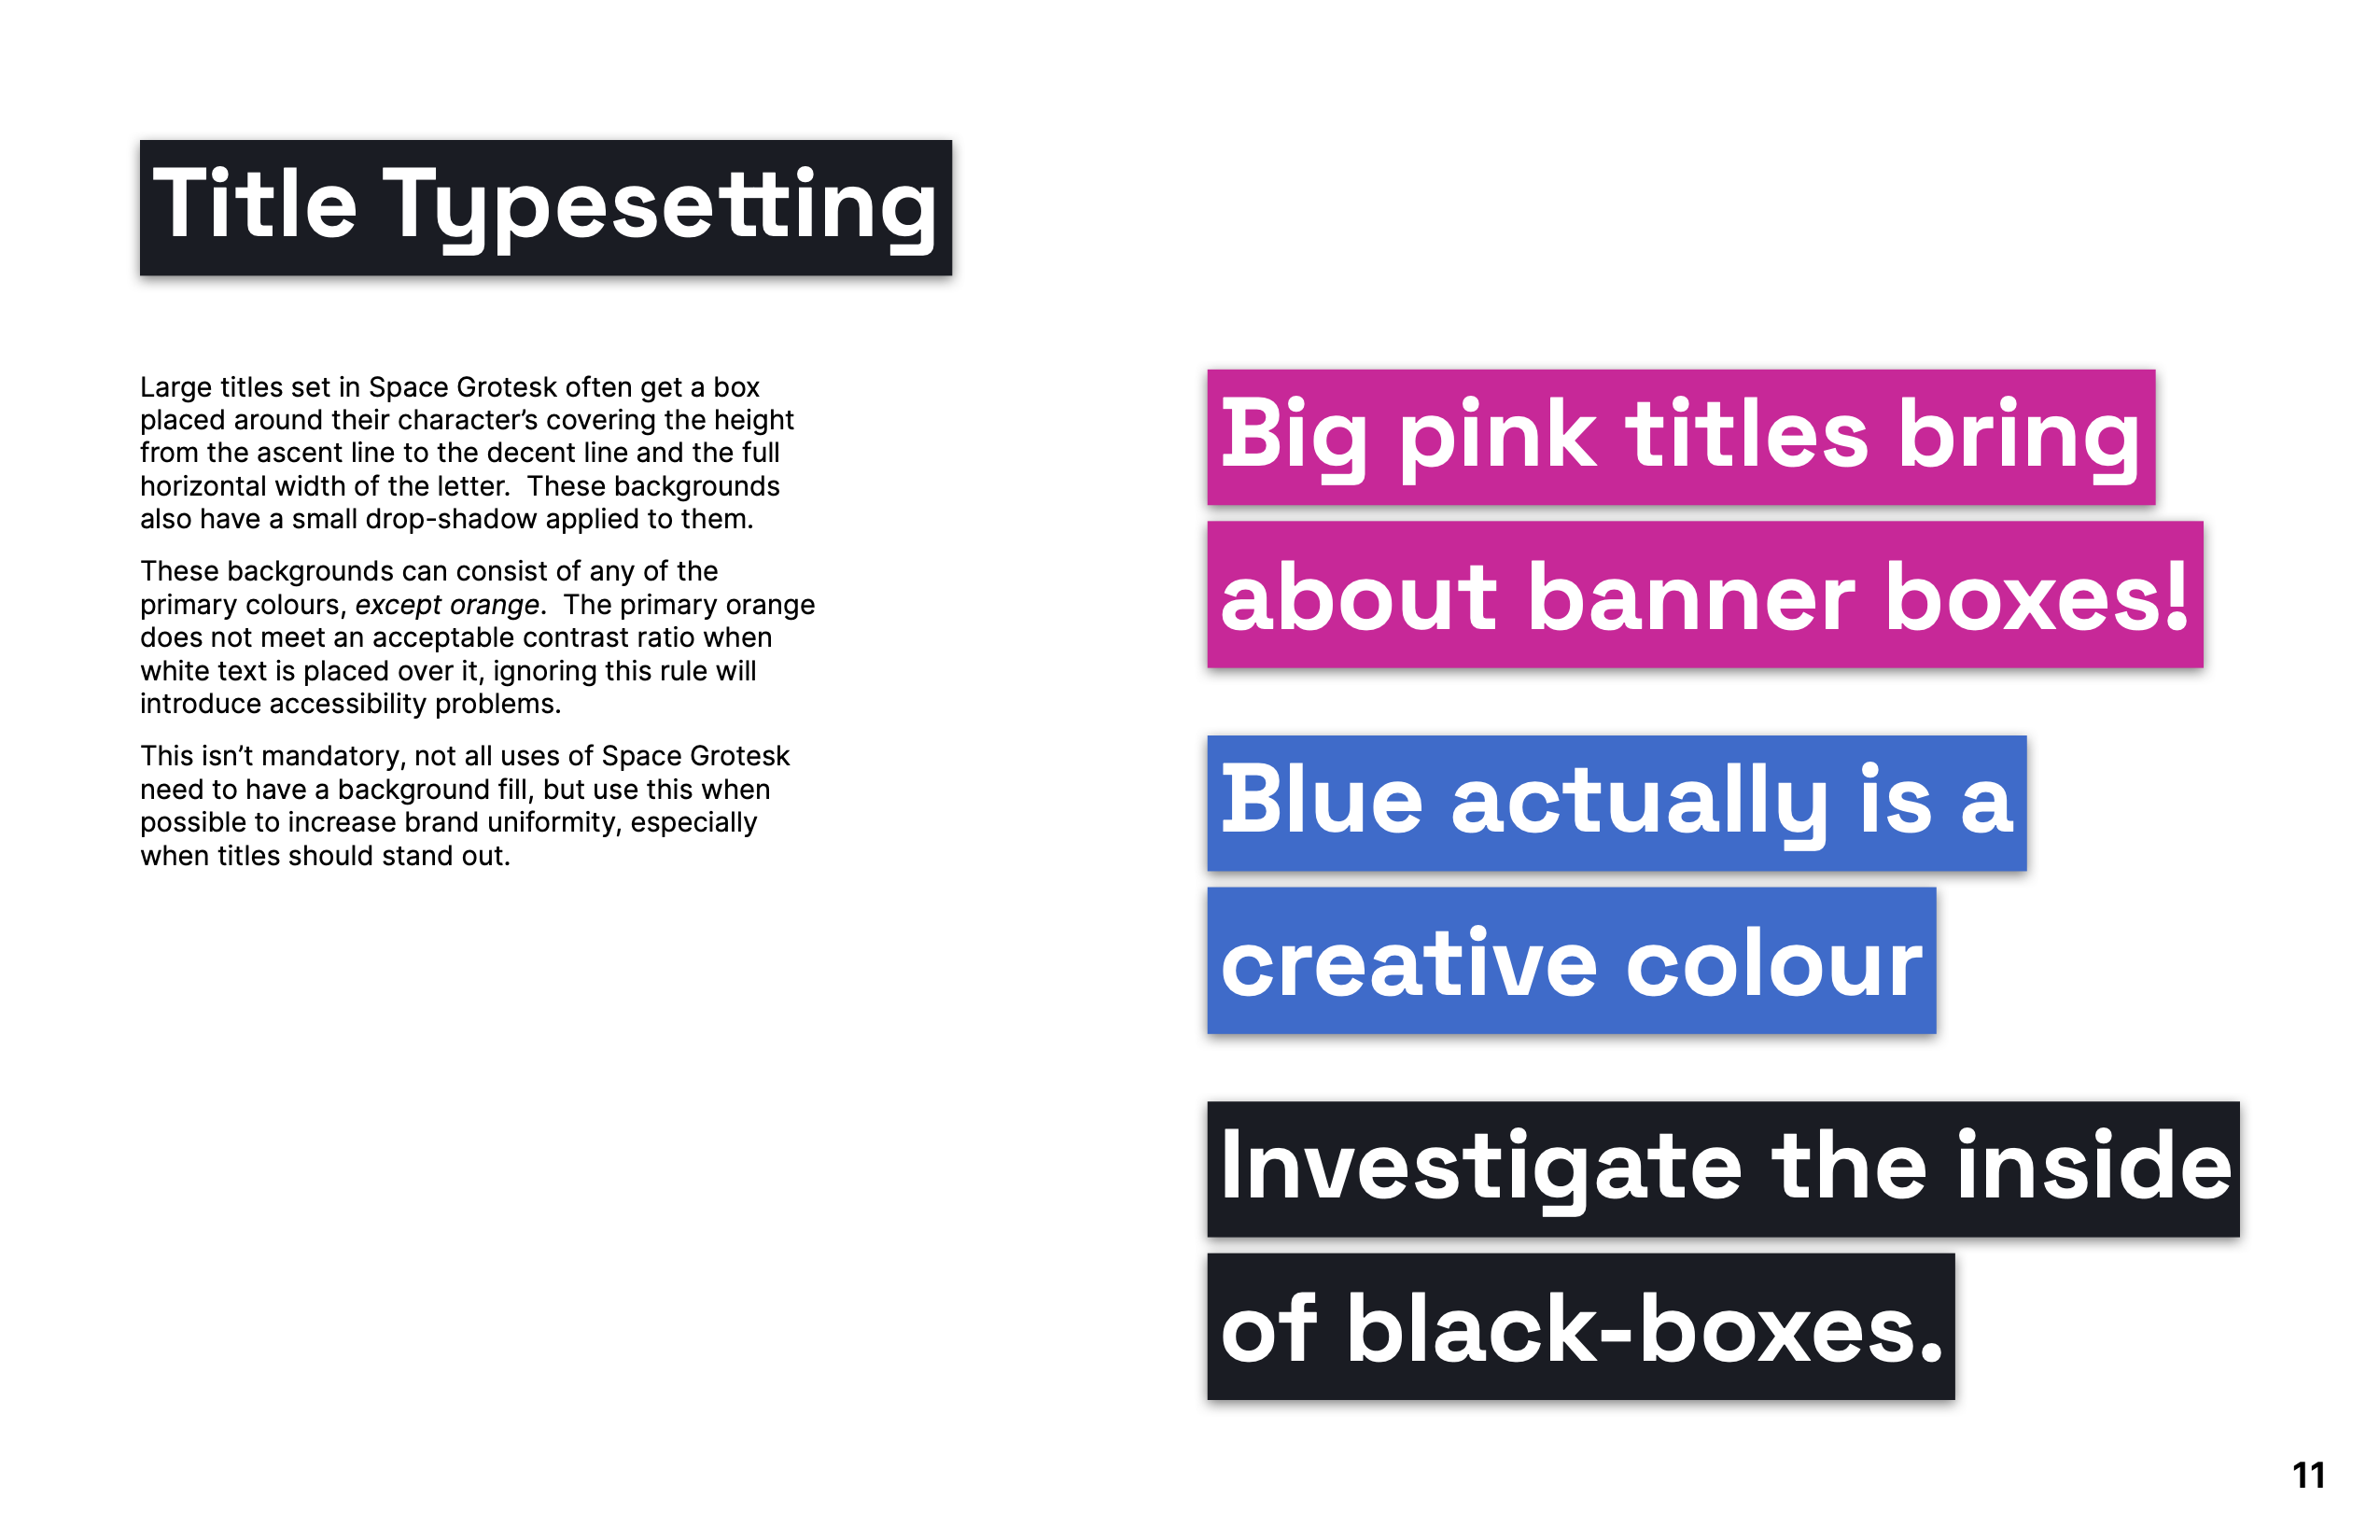 Title typesetting brand guidelines page